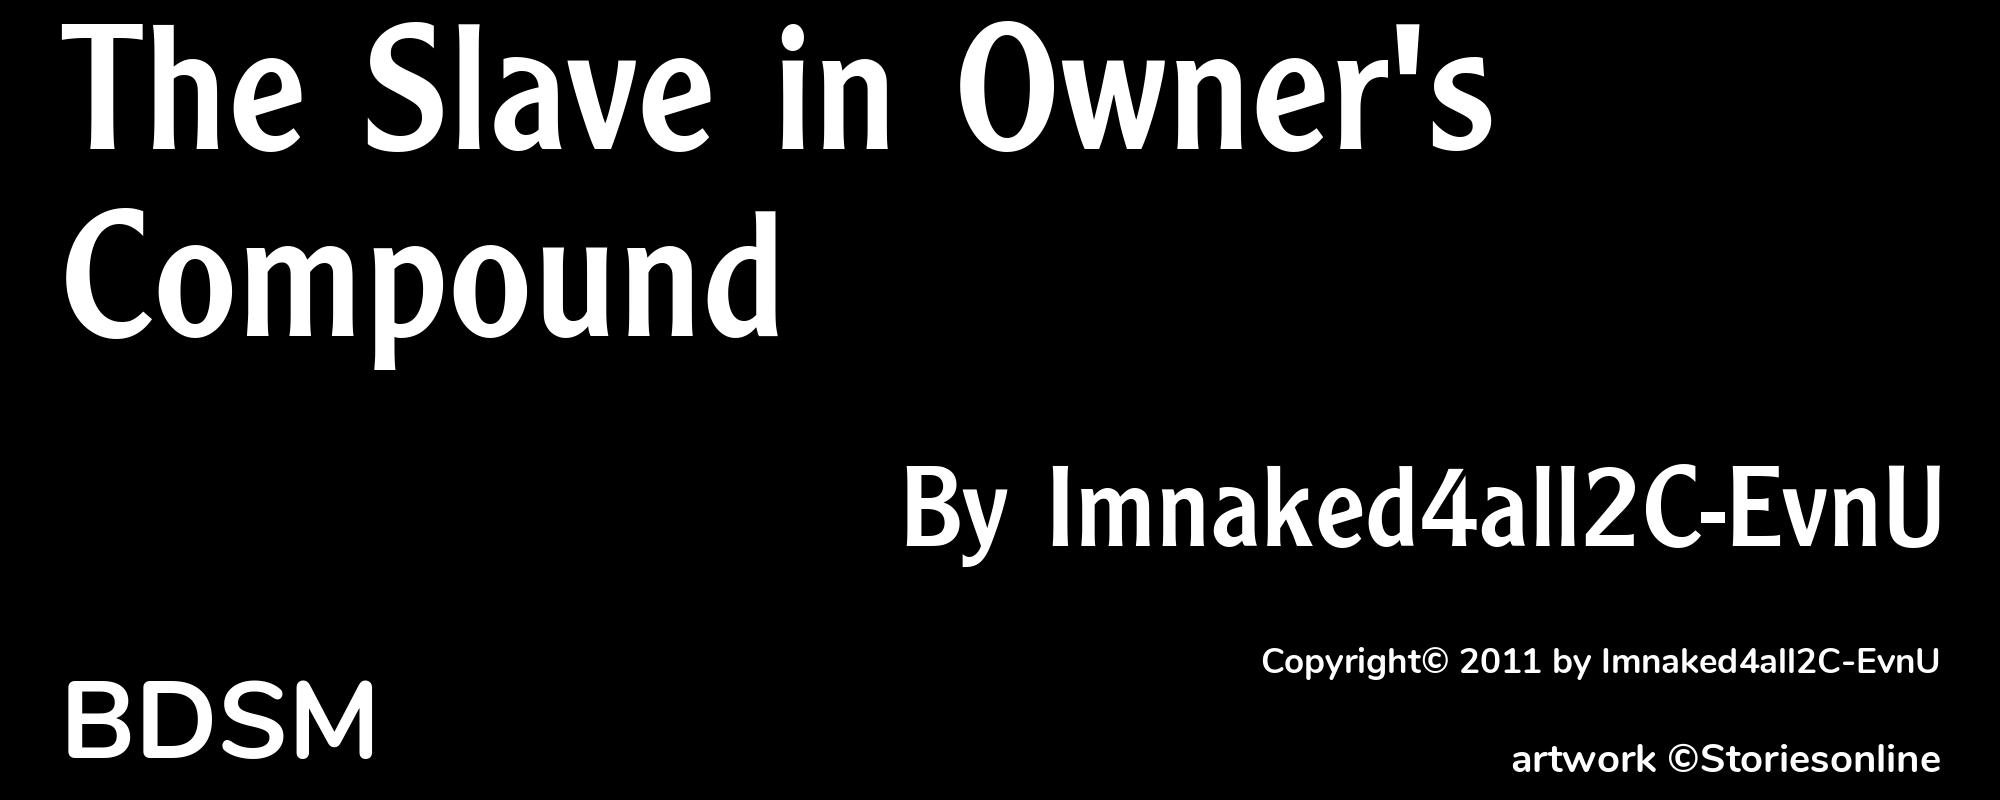 The Slave in Owner's Compound - Cover